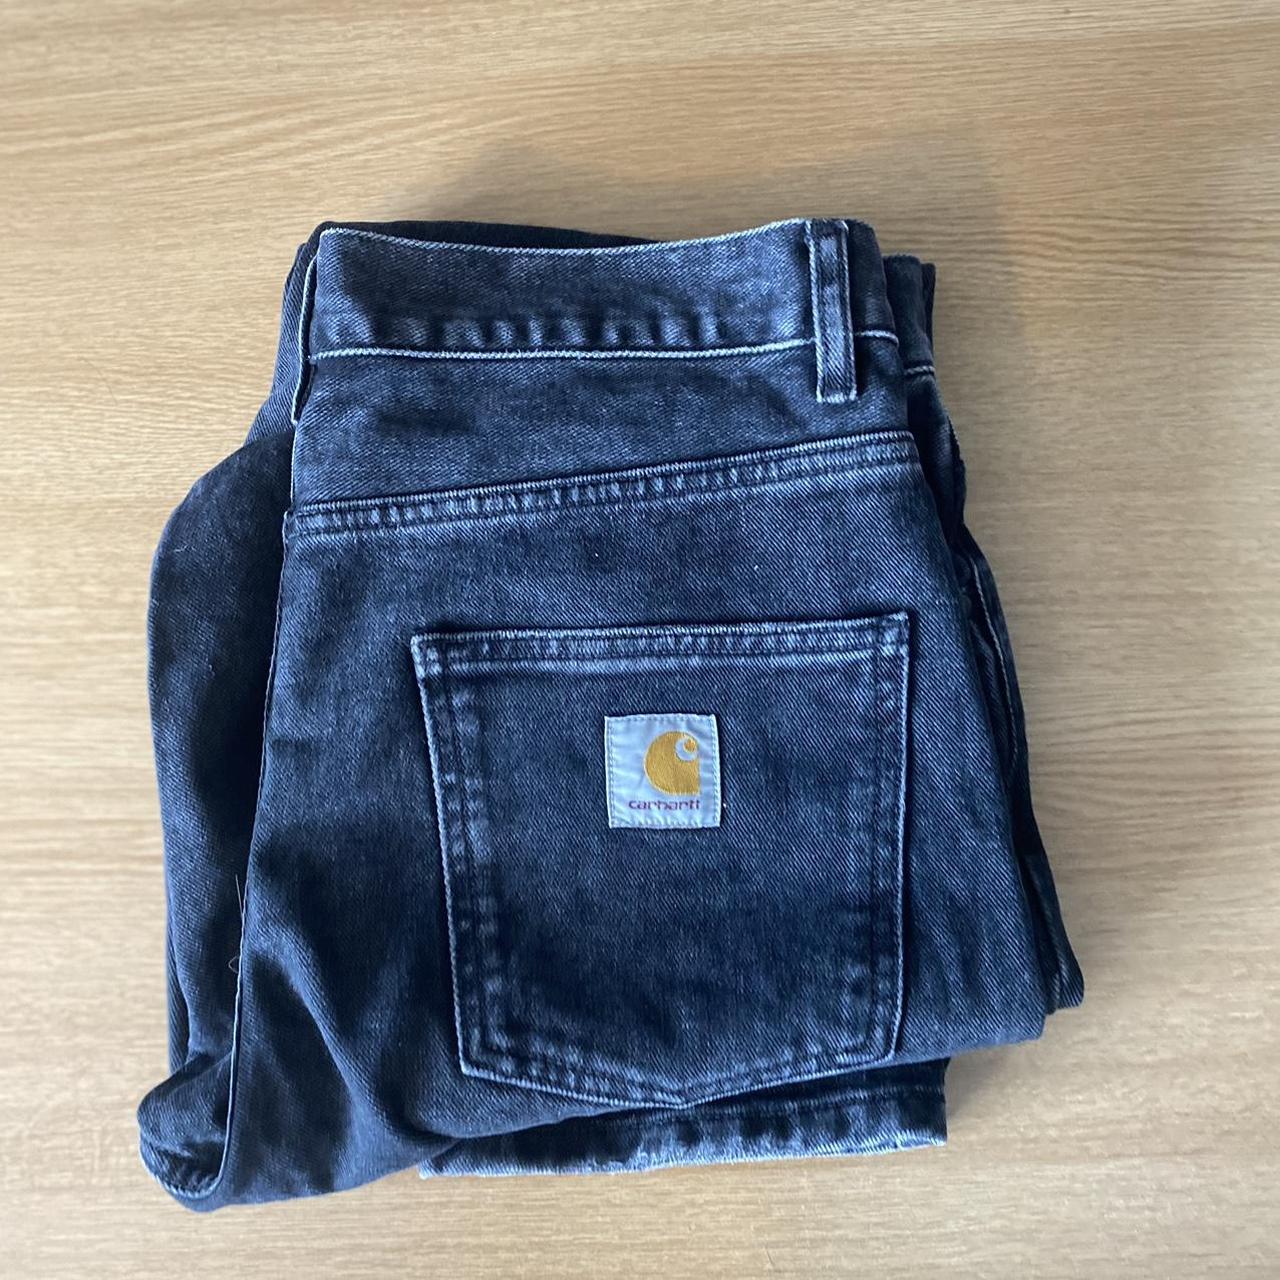 Carhartt loose fitting jeans Only worn a few times. - Depop